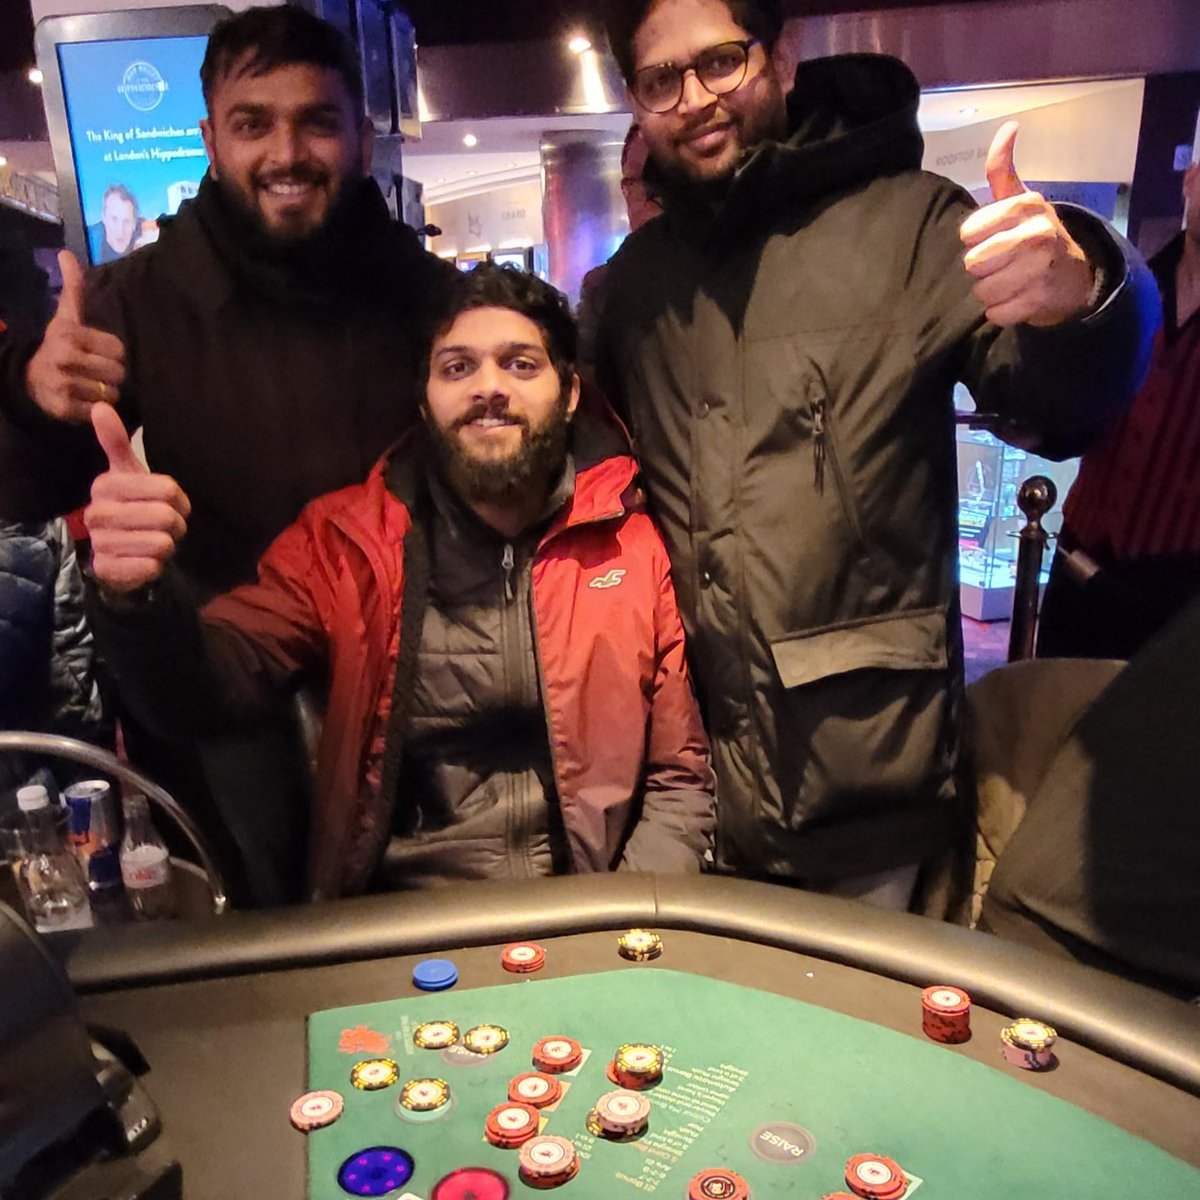 Jackpot hit! Congratulations to Mr Patel, who has taken home our progressive prize of £22,988 💰 💰